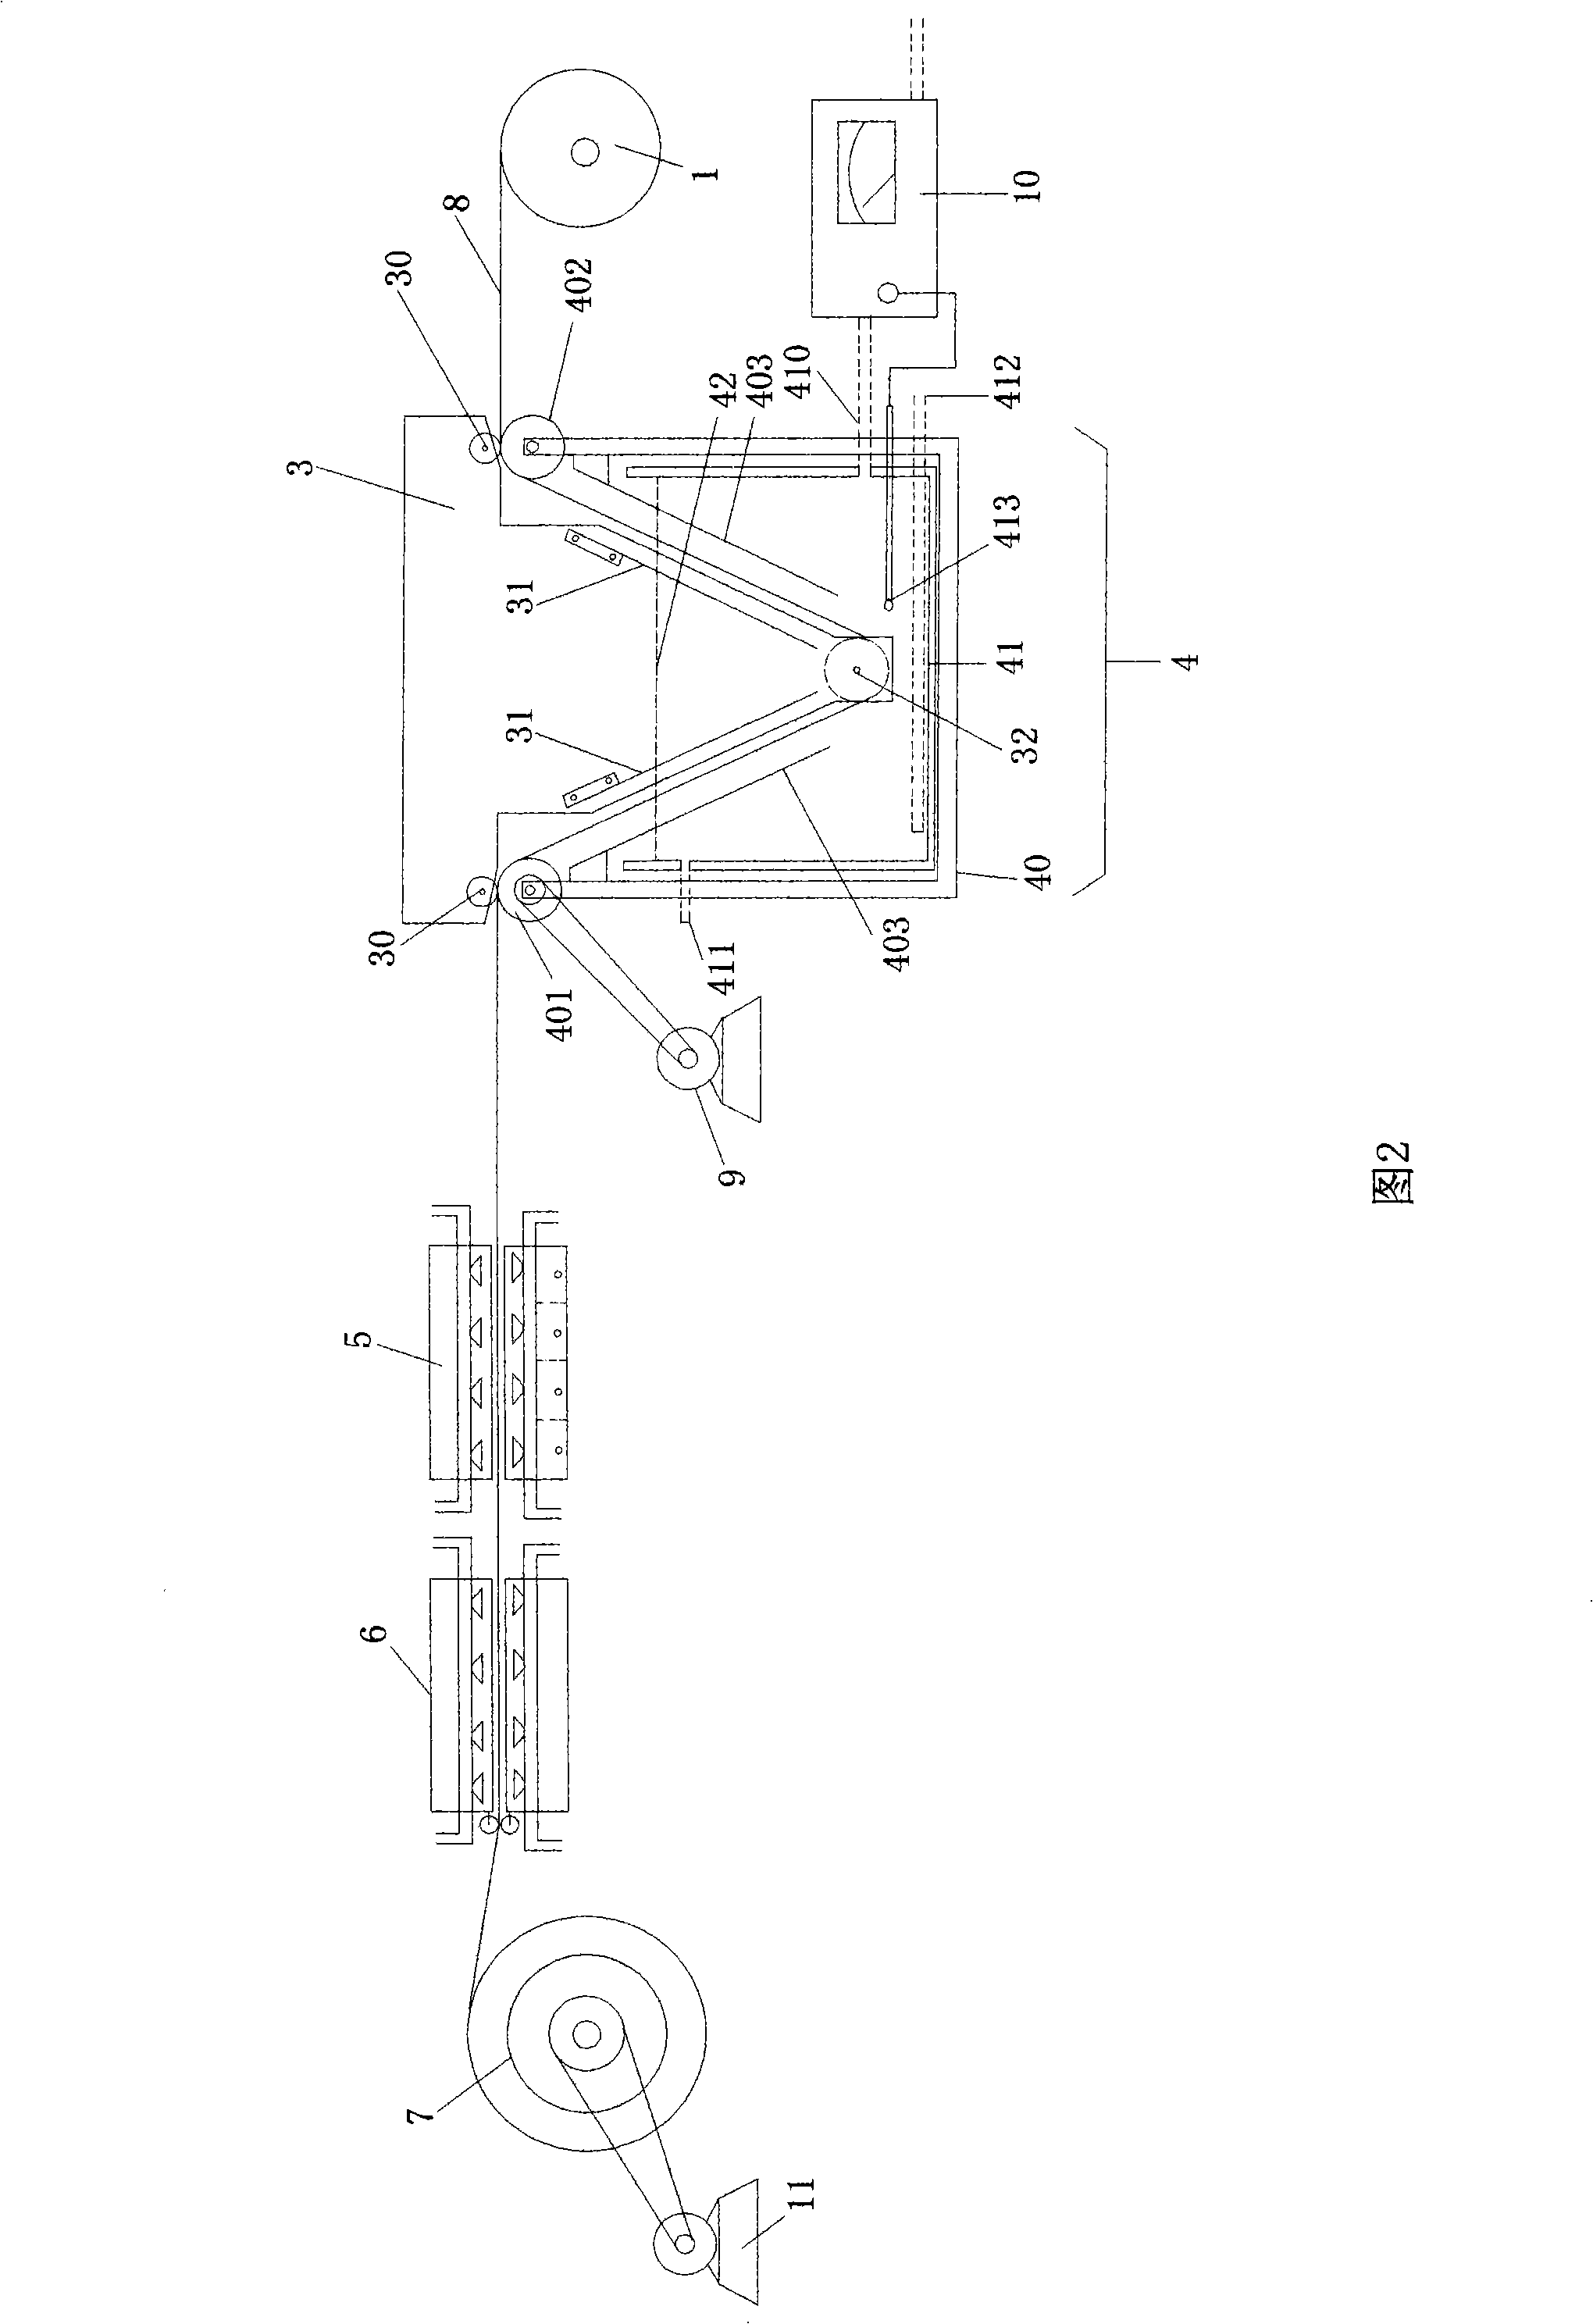 Metal foil band electroplating system and application thereof